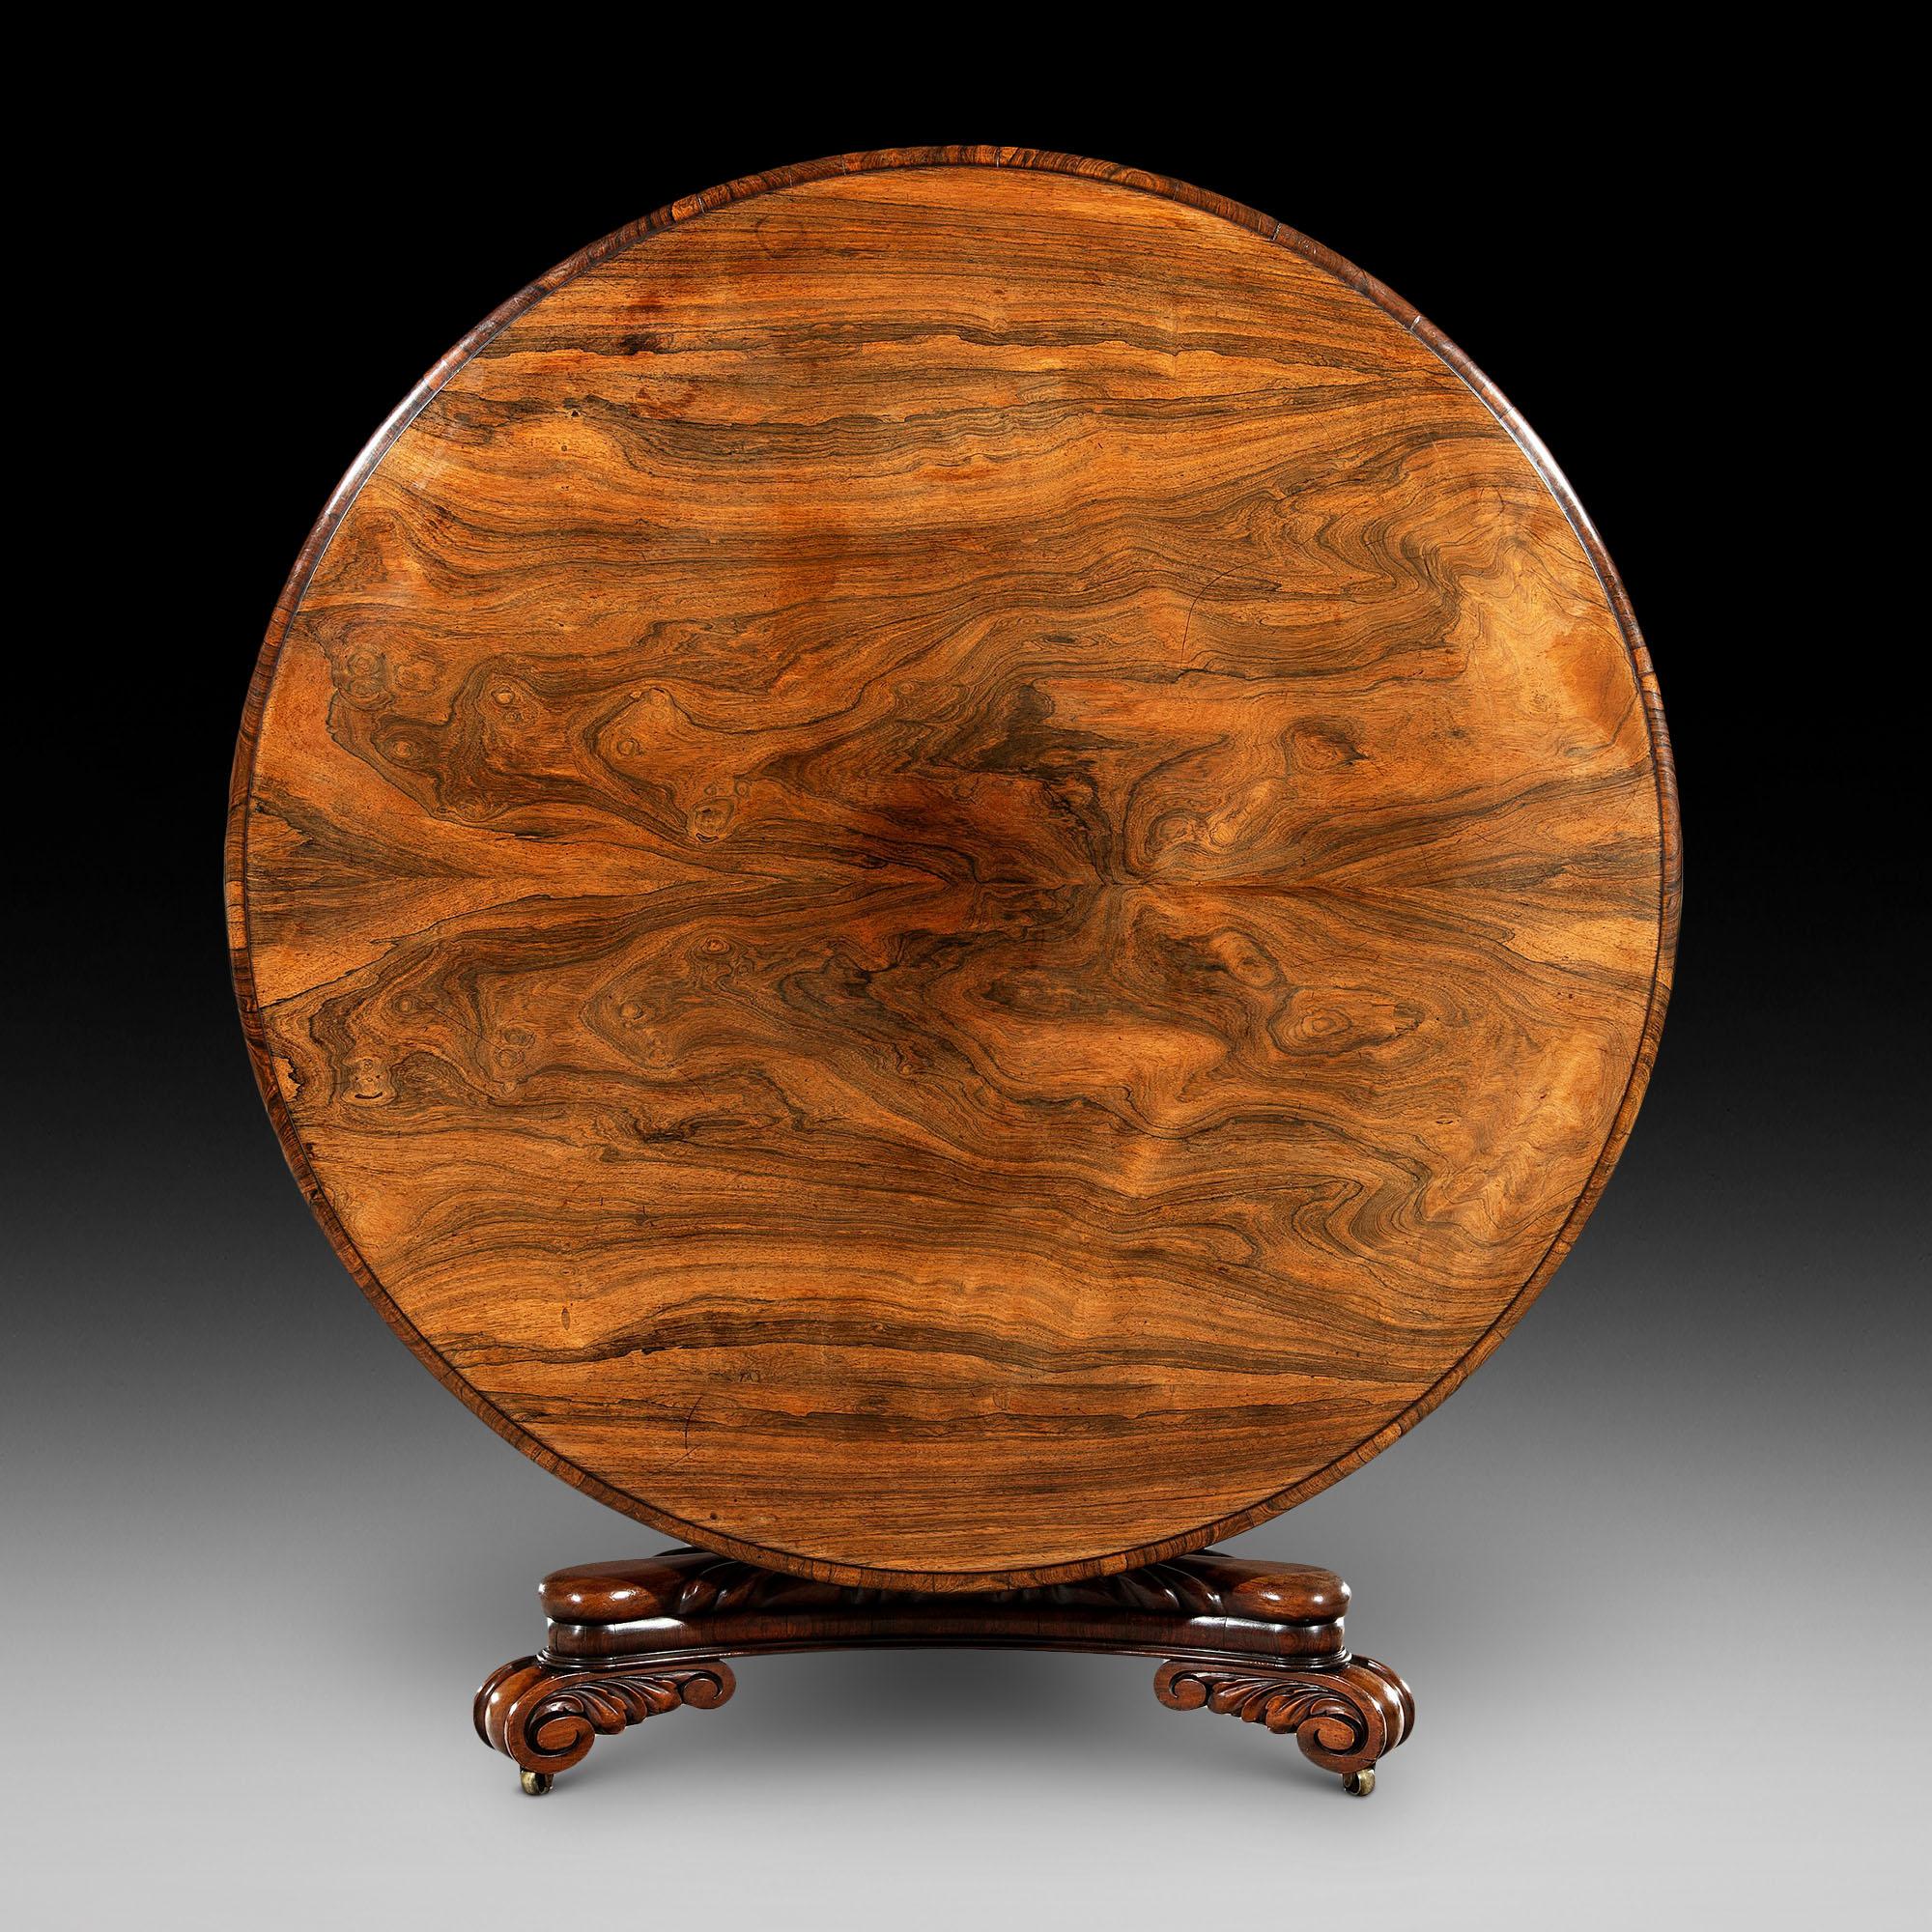 Large George IV Late Regency period eight-seat circular rosewood dining table the circular top is made on a mahogany base with bookmatched Brazilian rosewood veneers and a moulded edge above a concave cushion moulded cross banded frieze. The